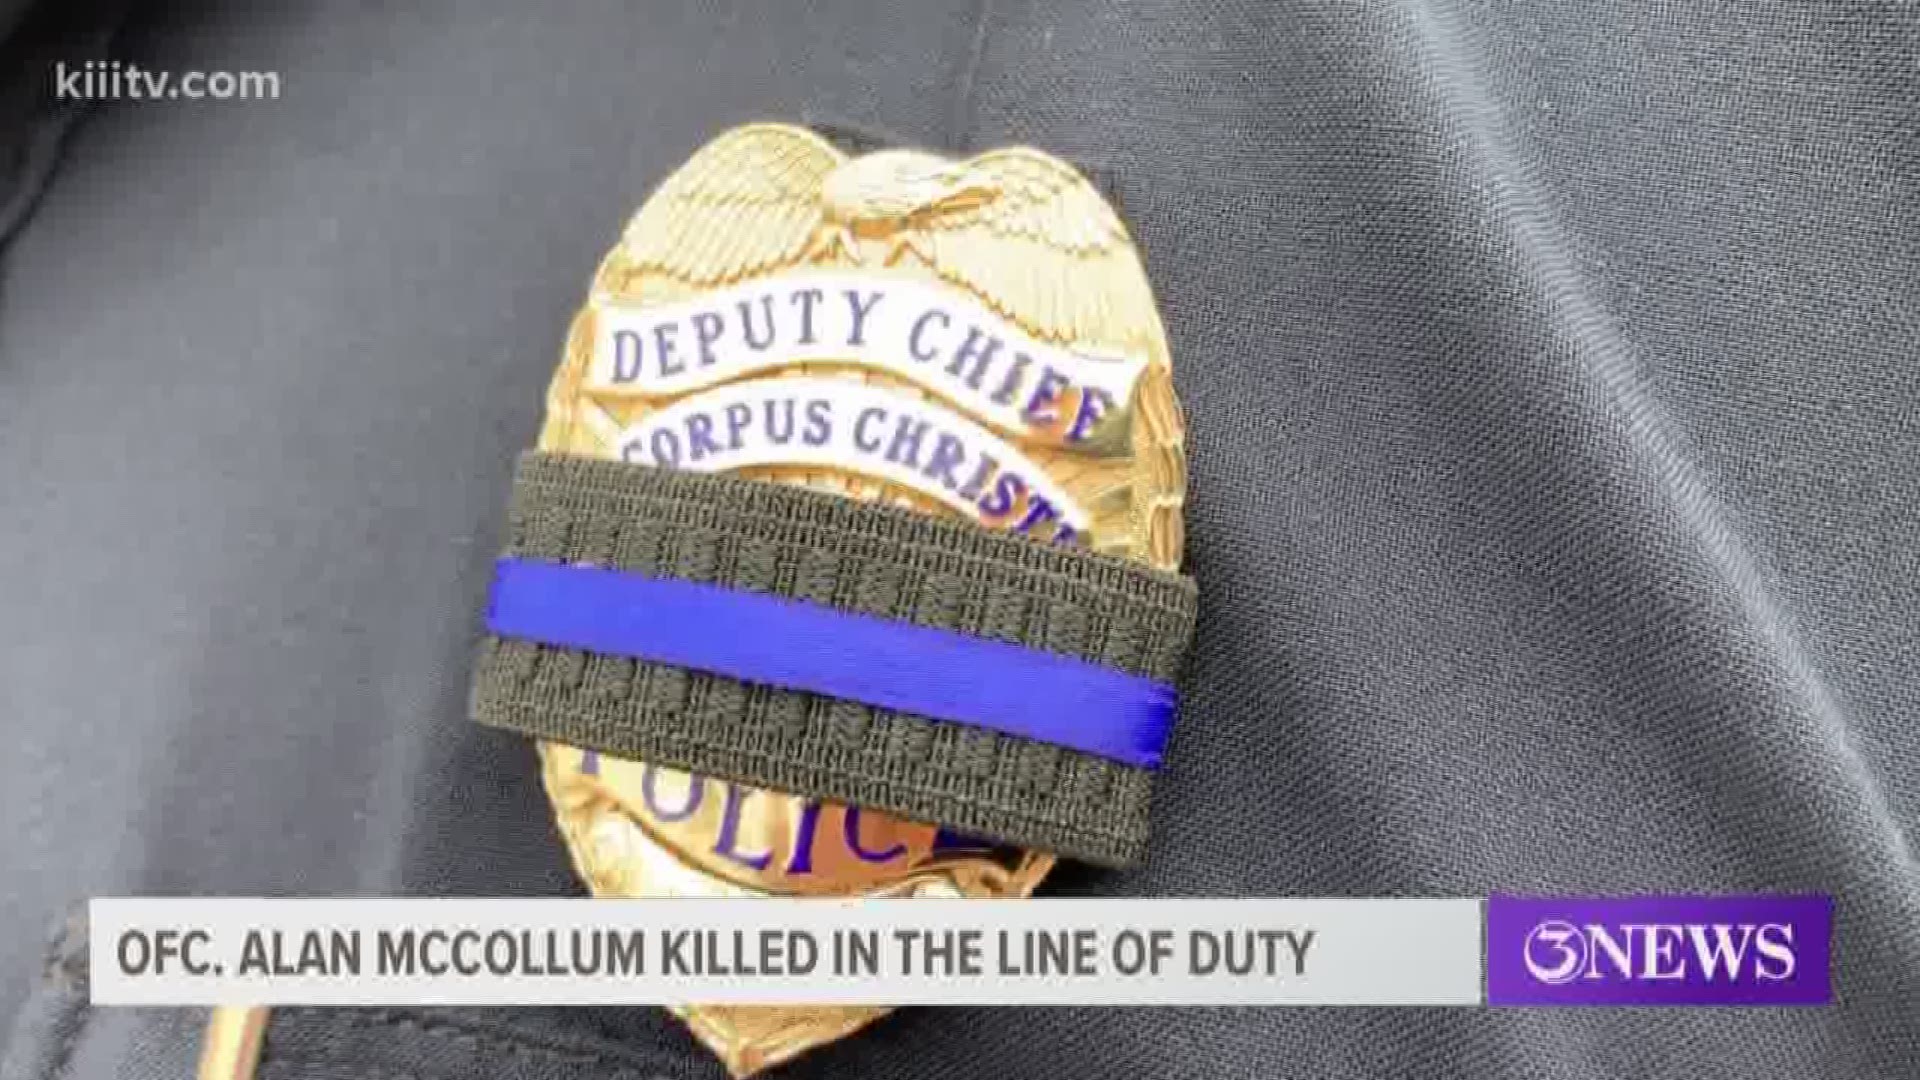 The Corpus Christi Police Department have been paying tribute to fallen hero Alan McCollum who was killed Friday night during a traffic stop.